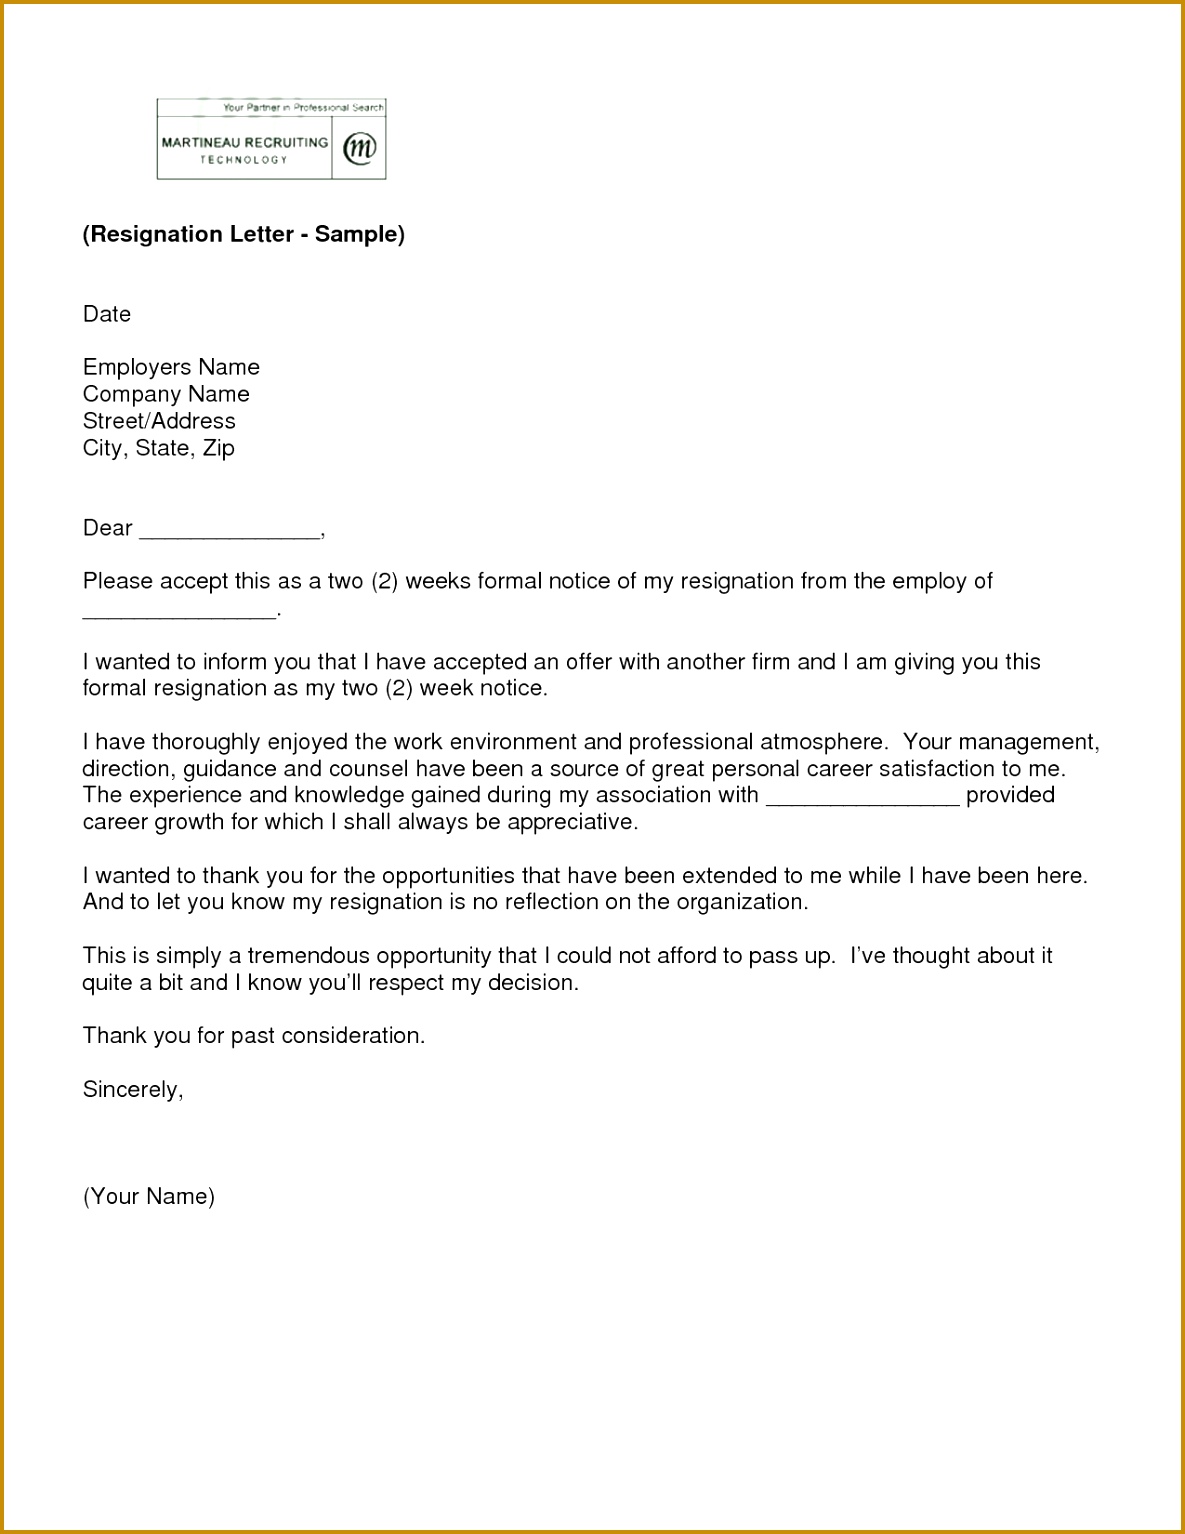 letter of resignation 2 weeks notice template 15341185